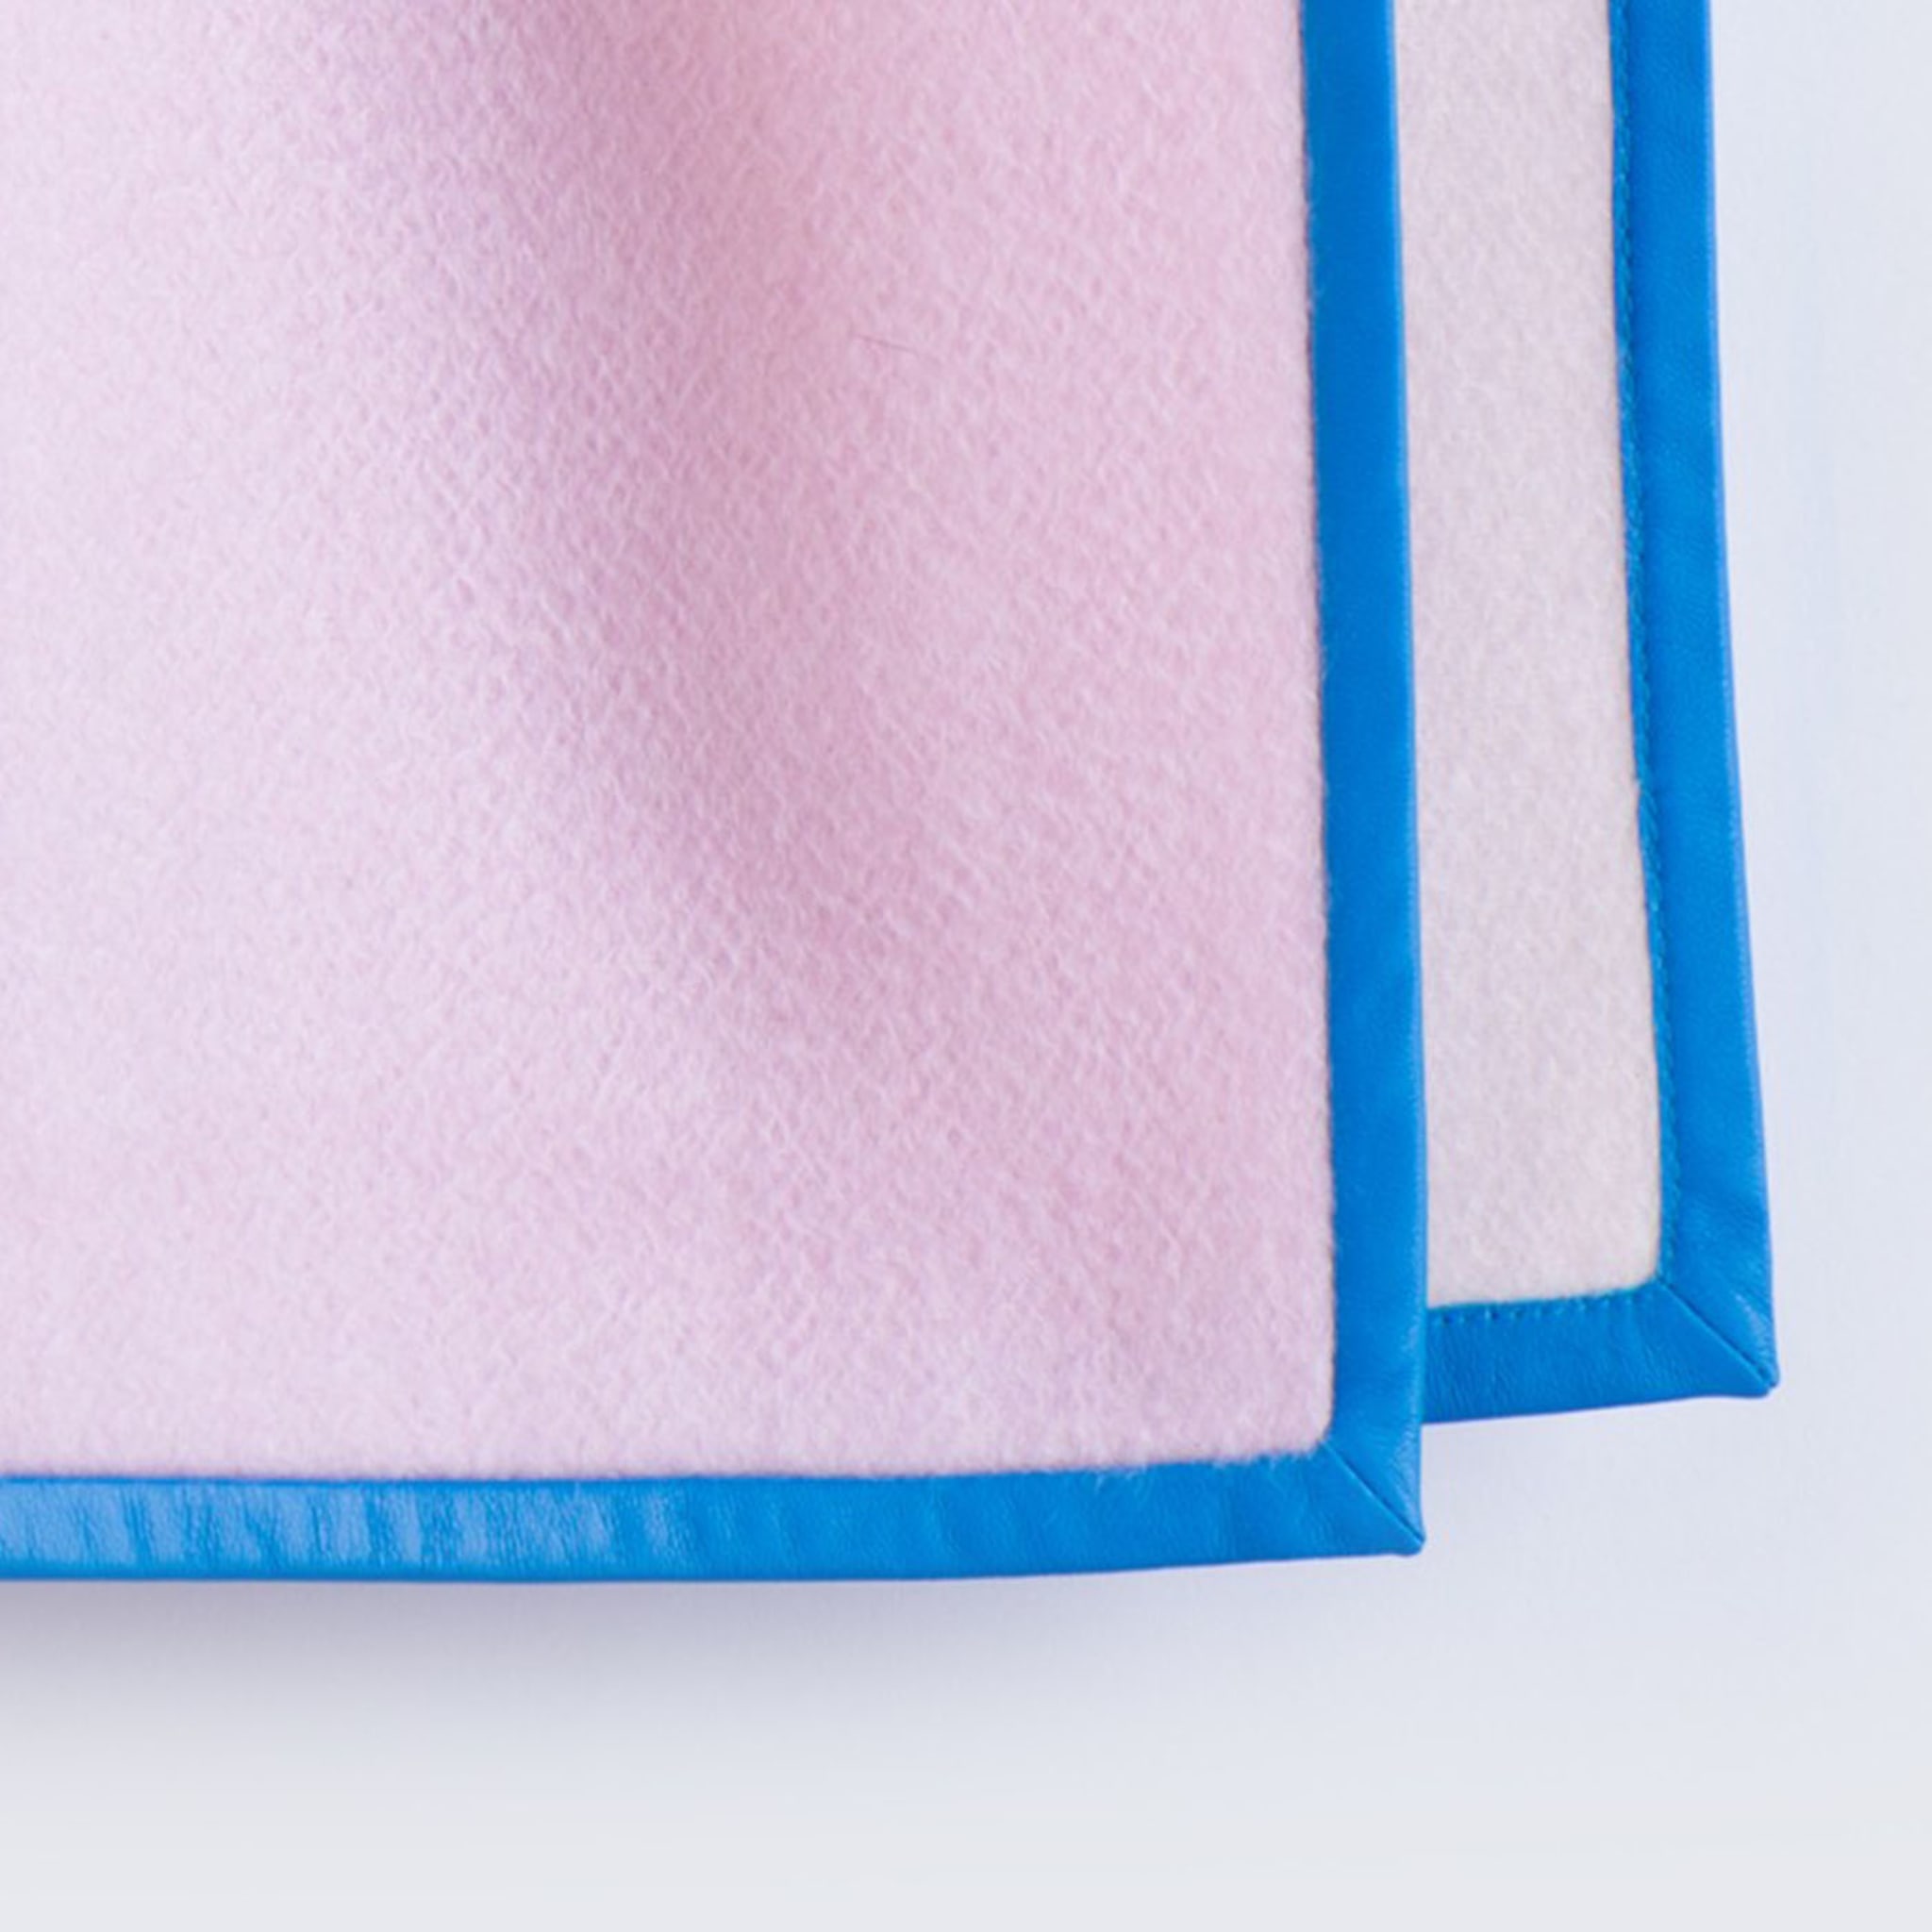 Biella Blue Leather and Pink Blanket - Alternative view 1